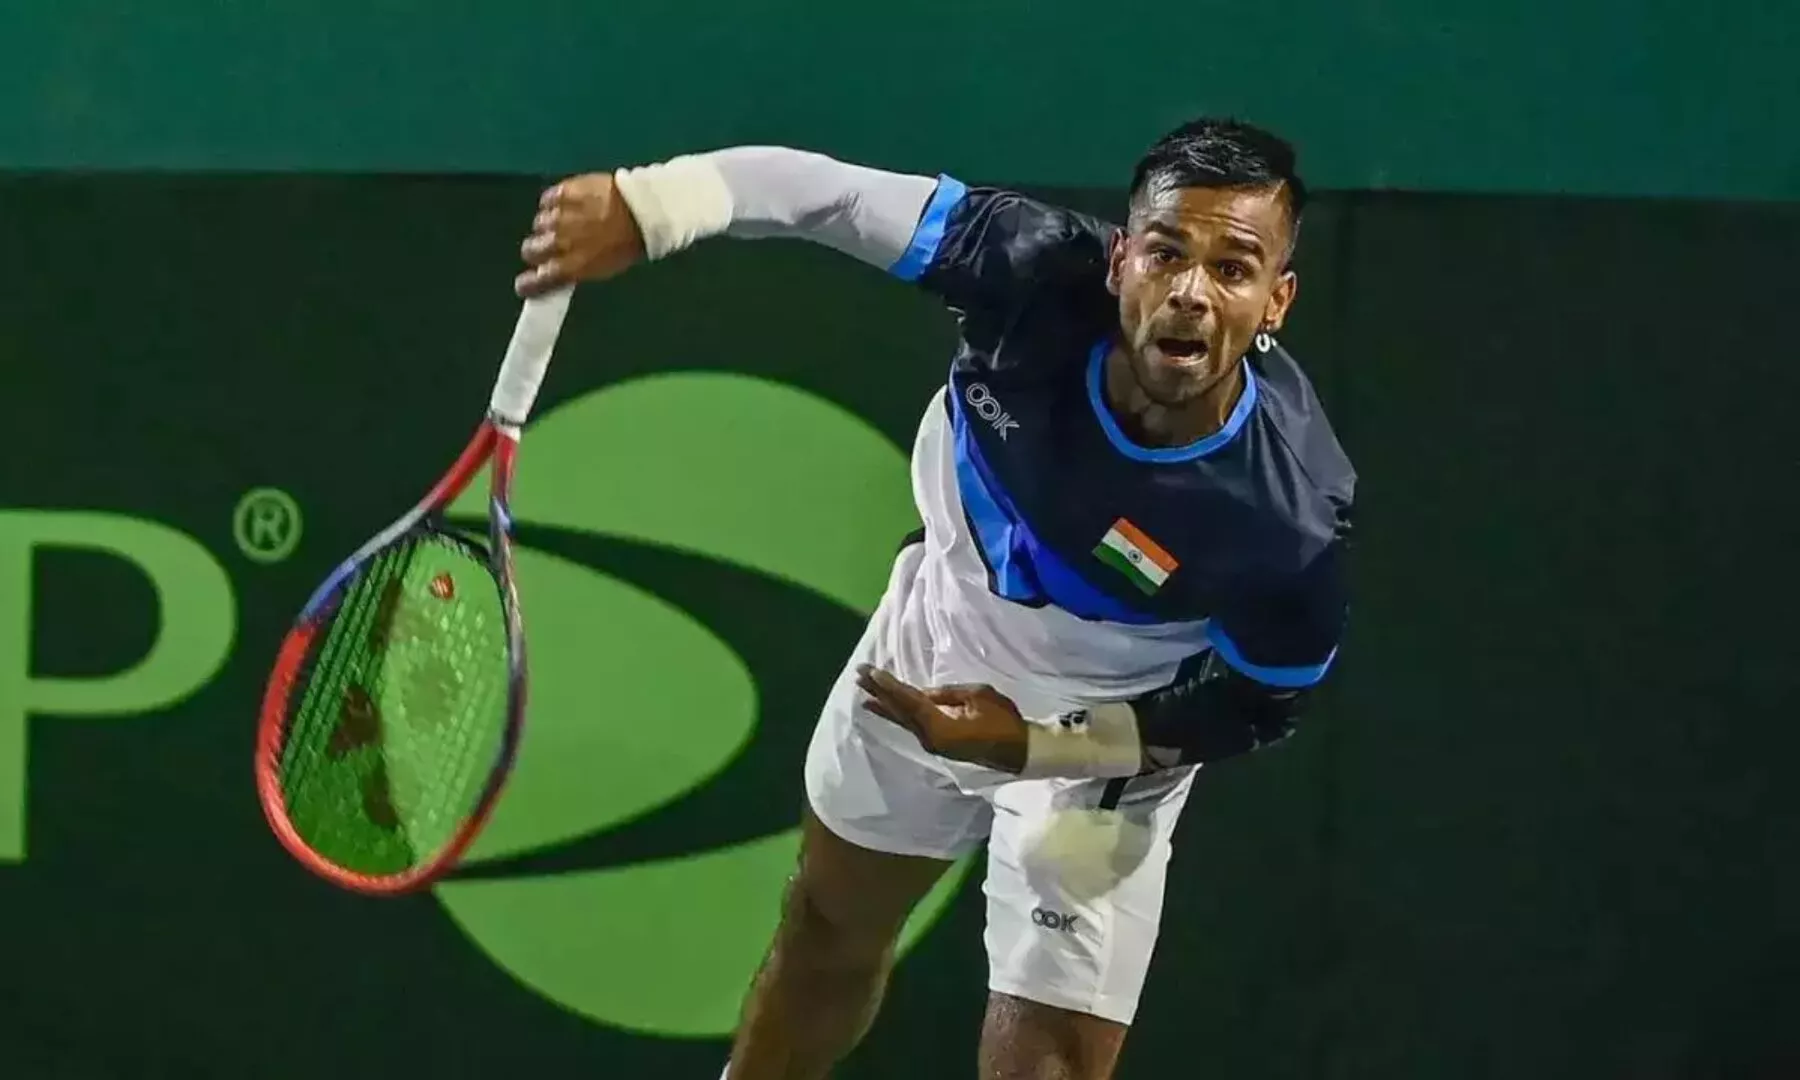 Sumit Nagal climbs to World No. 141 in latest ATP rankings after runner-up finish in Helsinki